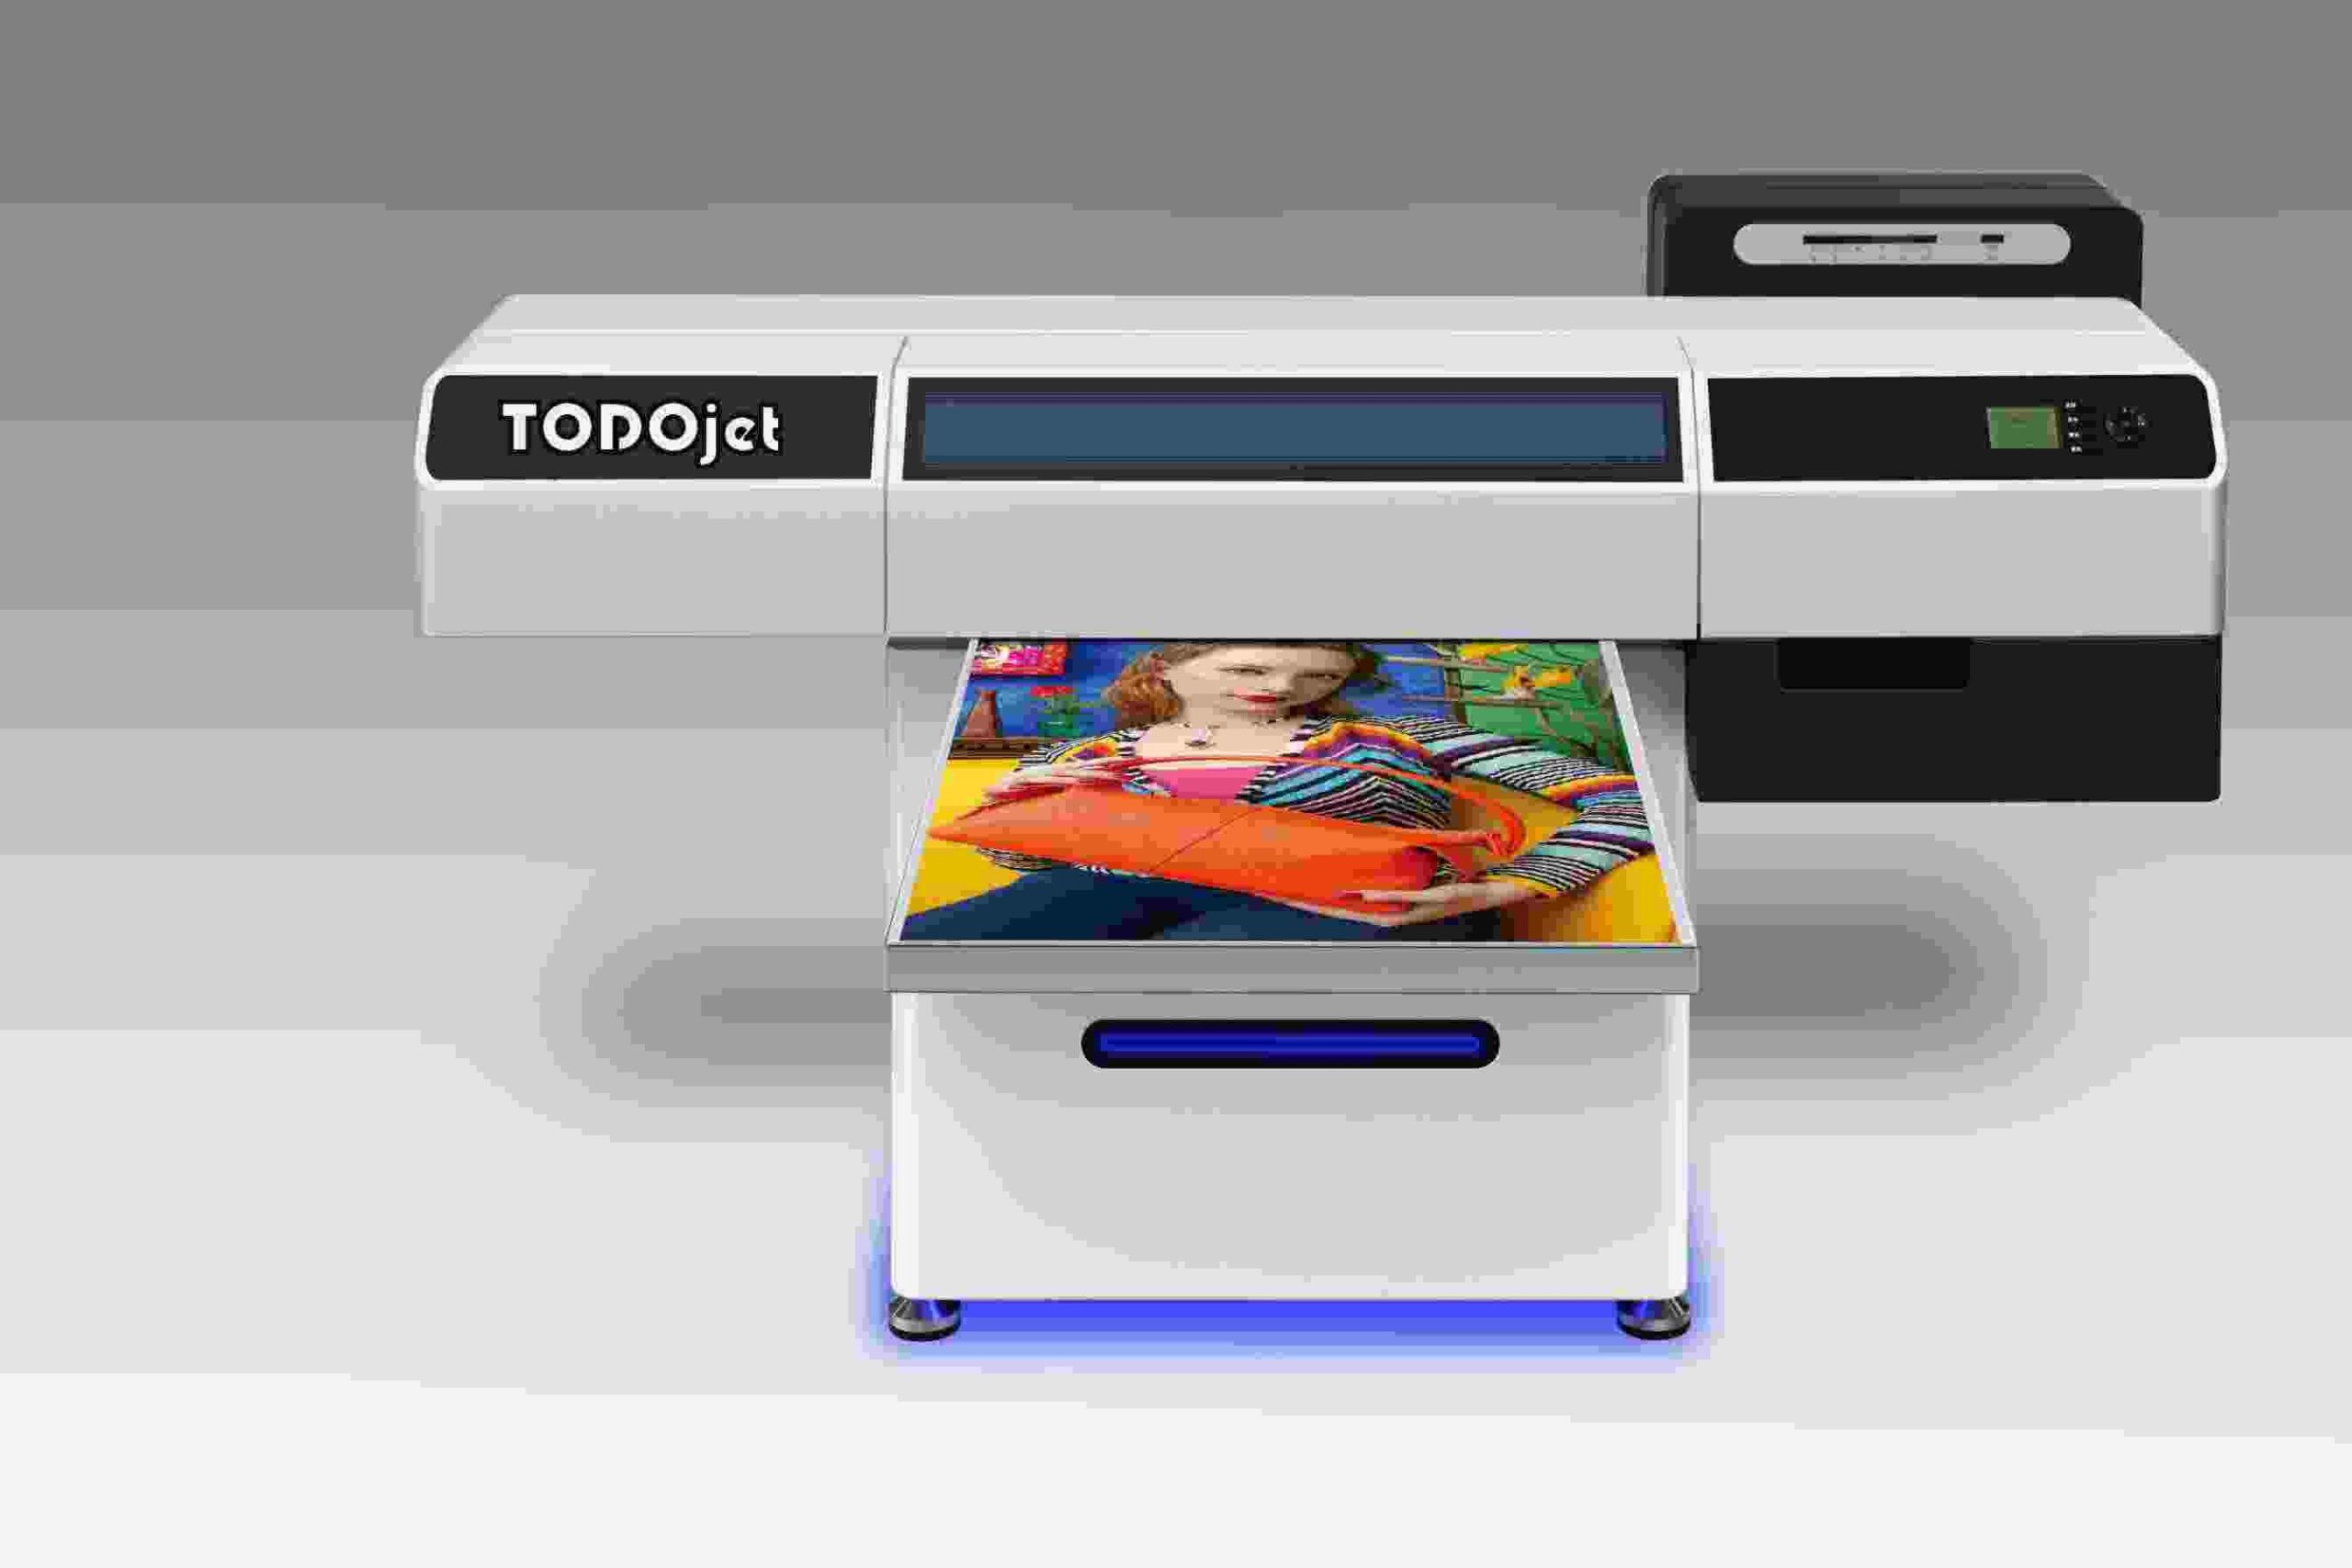 Why the UV flatbed printer color problem?